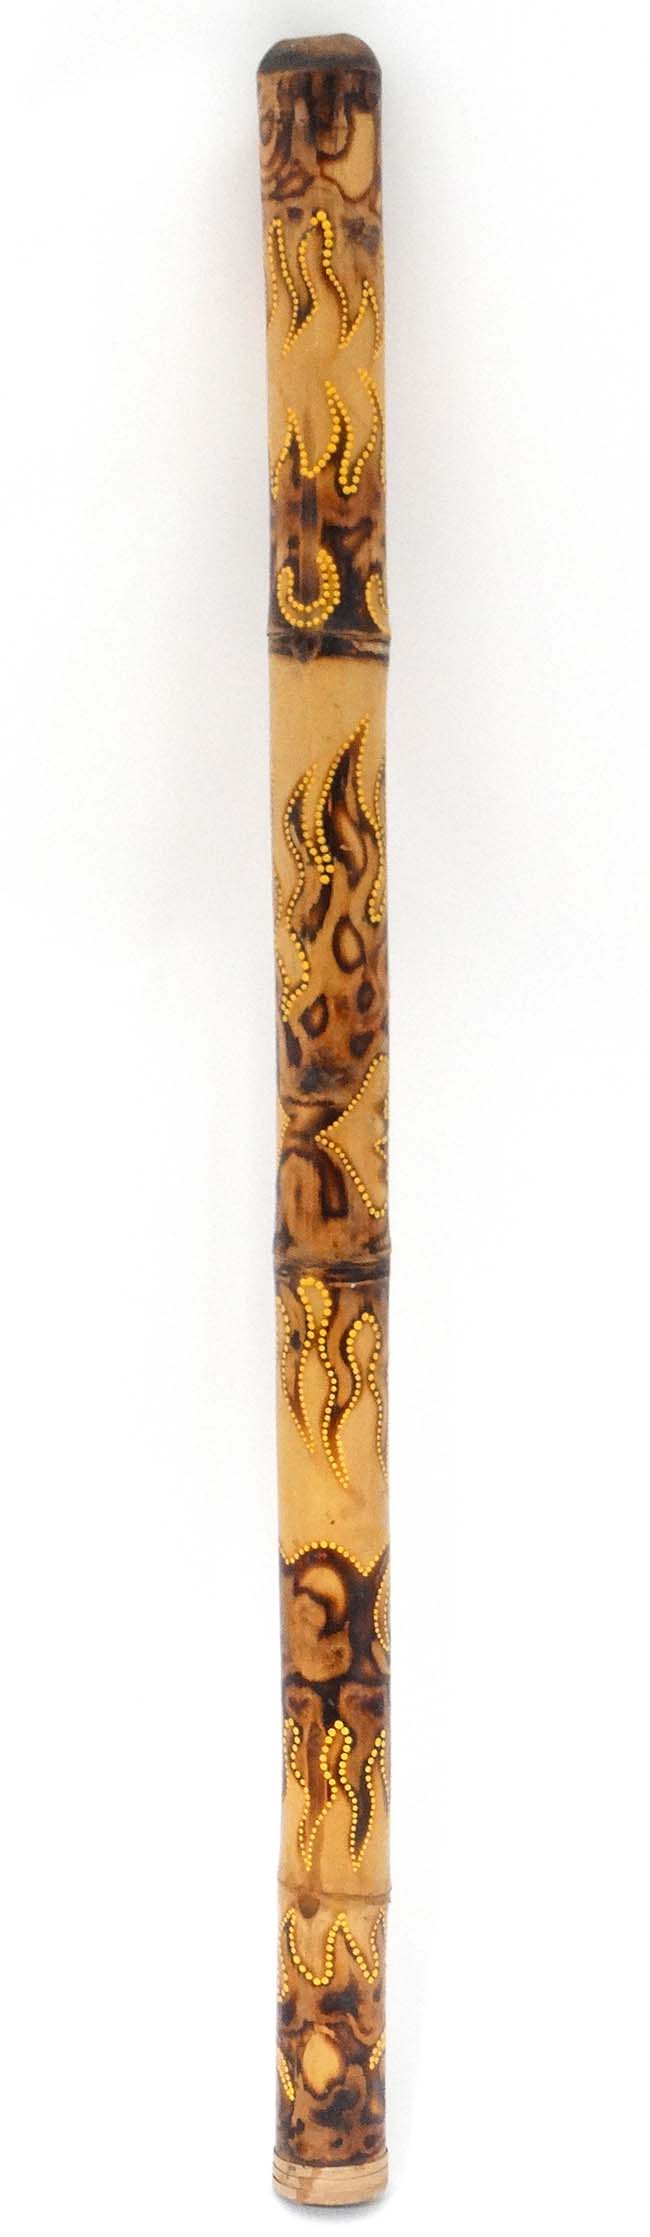 Didgeridoo CONDITION: Please Note - we do not make reference to the condition of